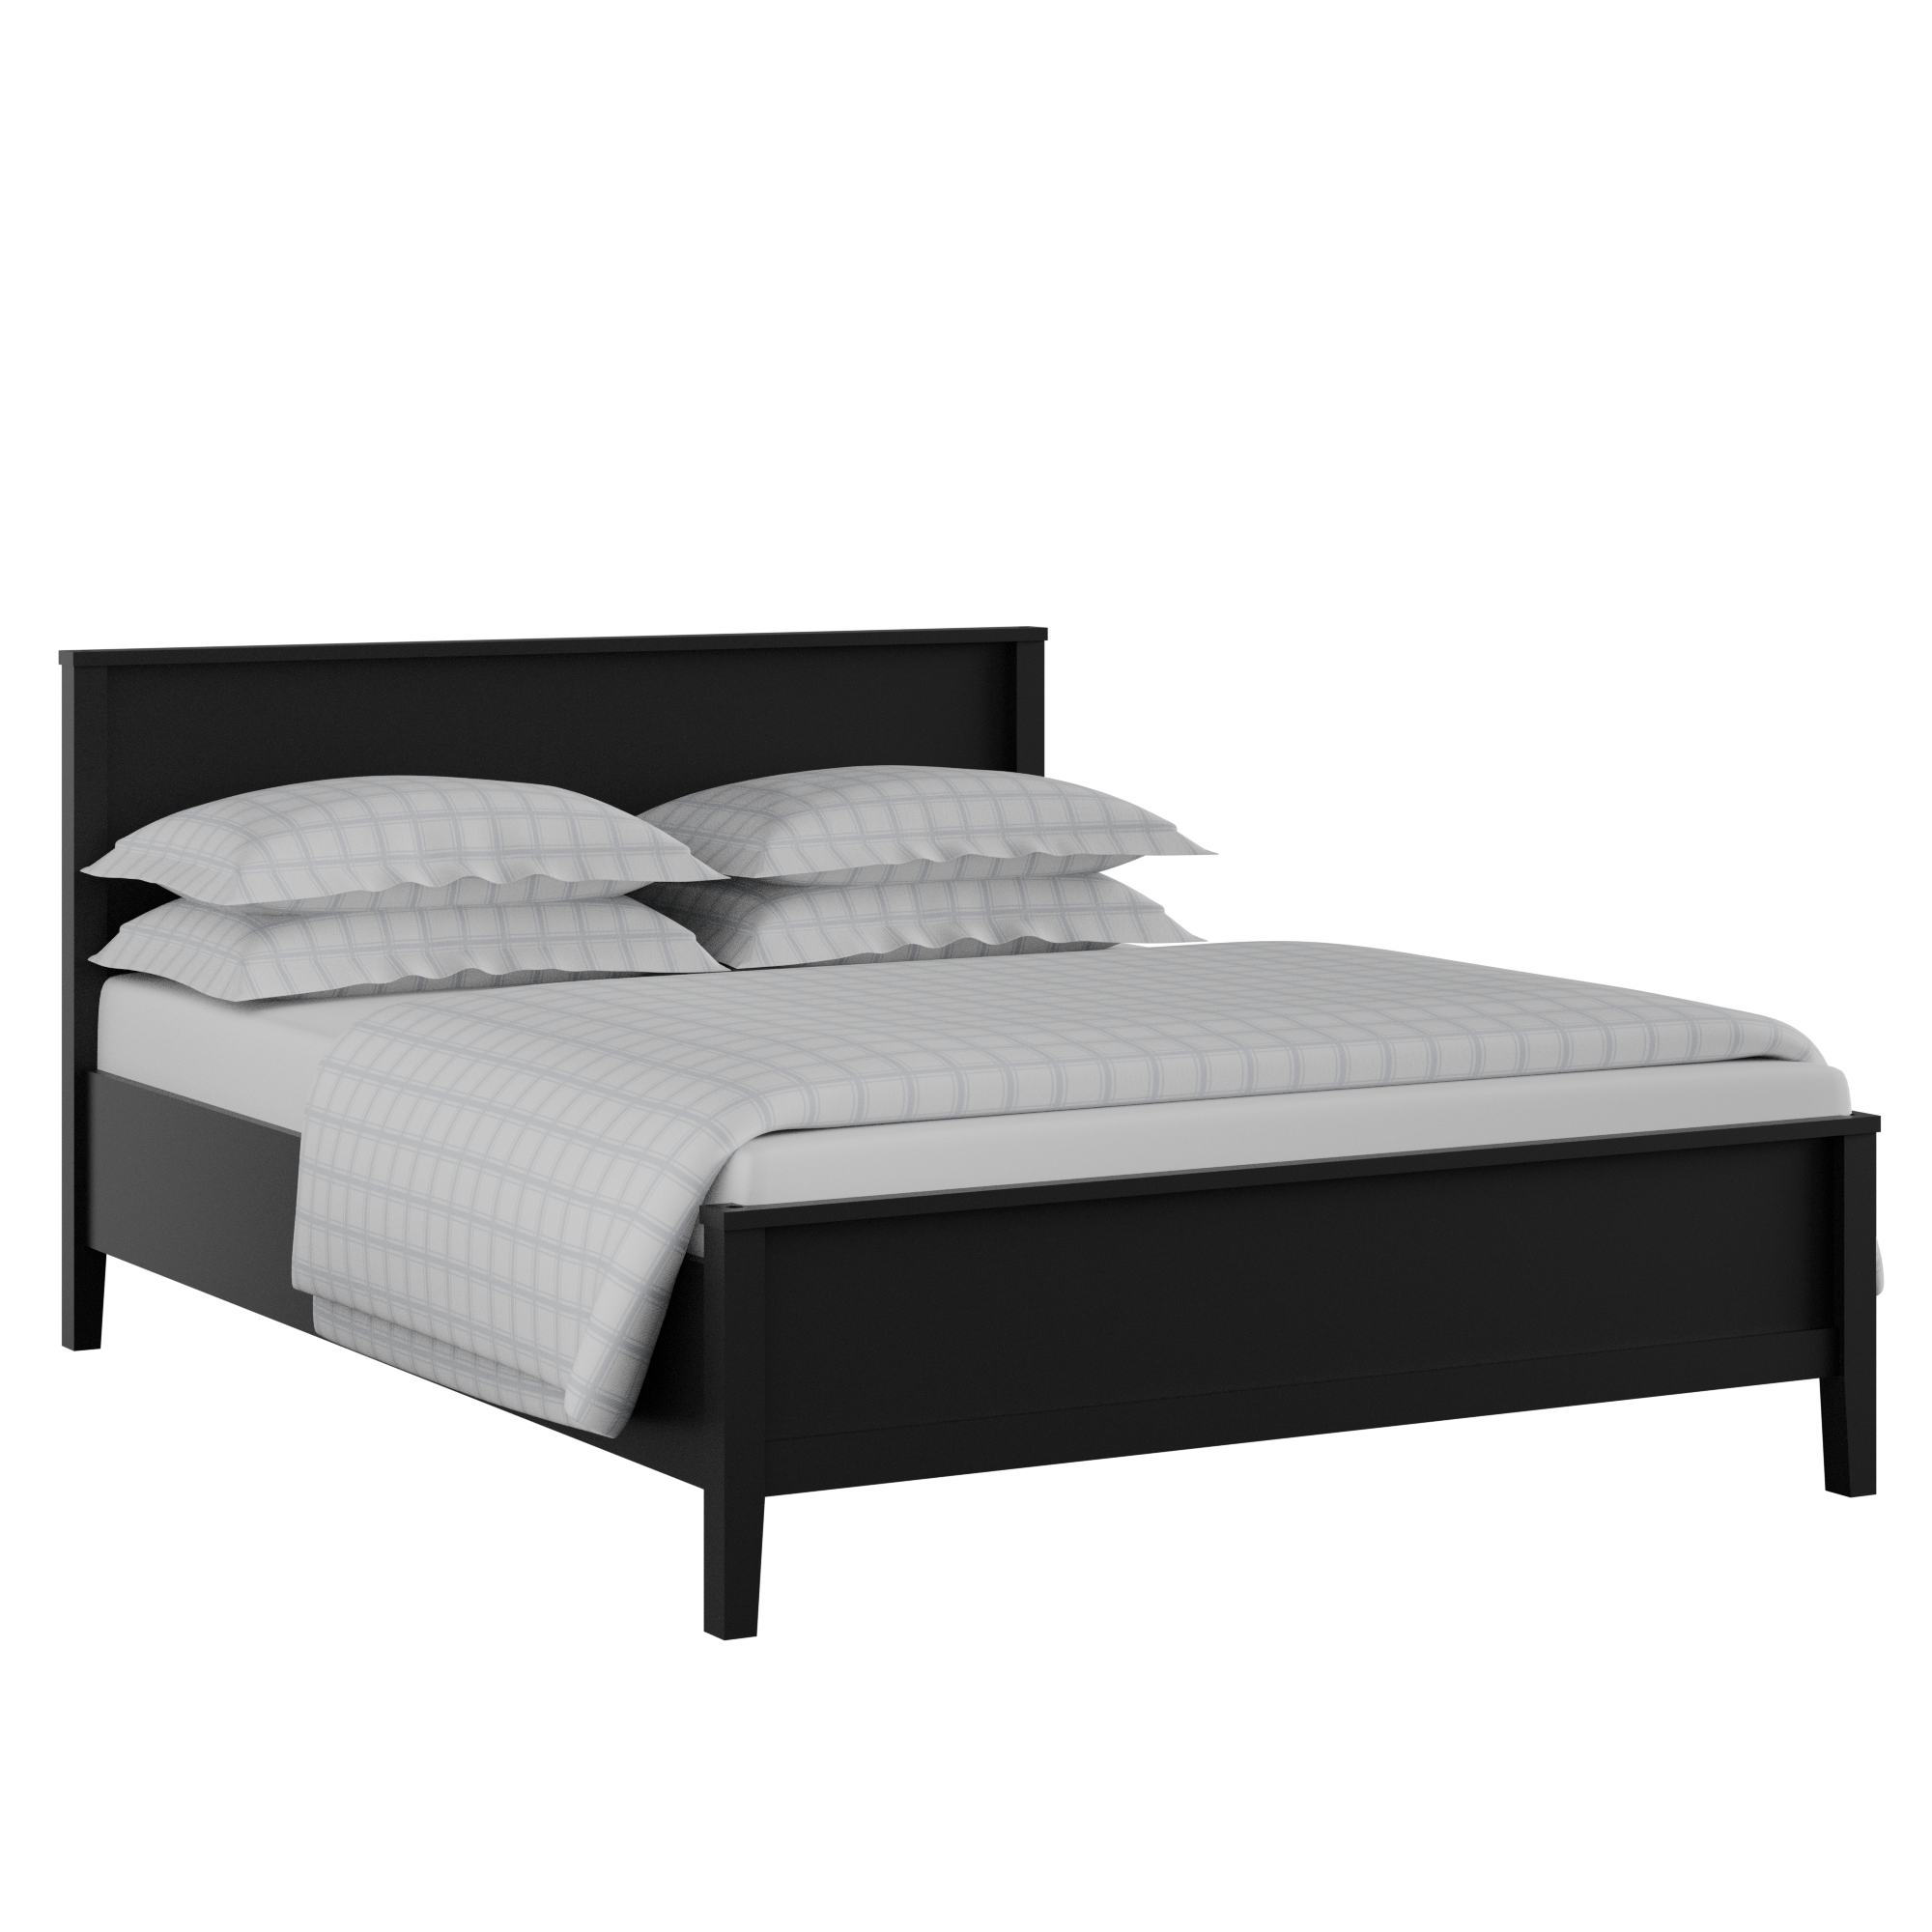 Ramsay Painted painted wood bed in black with Juno mattress